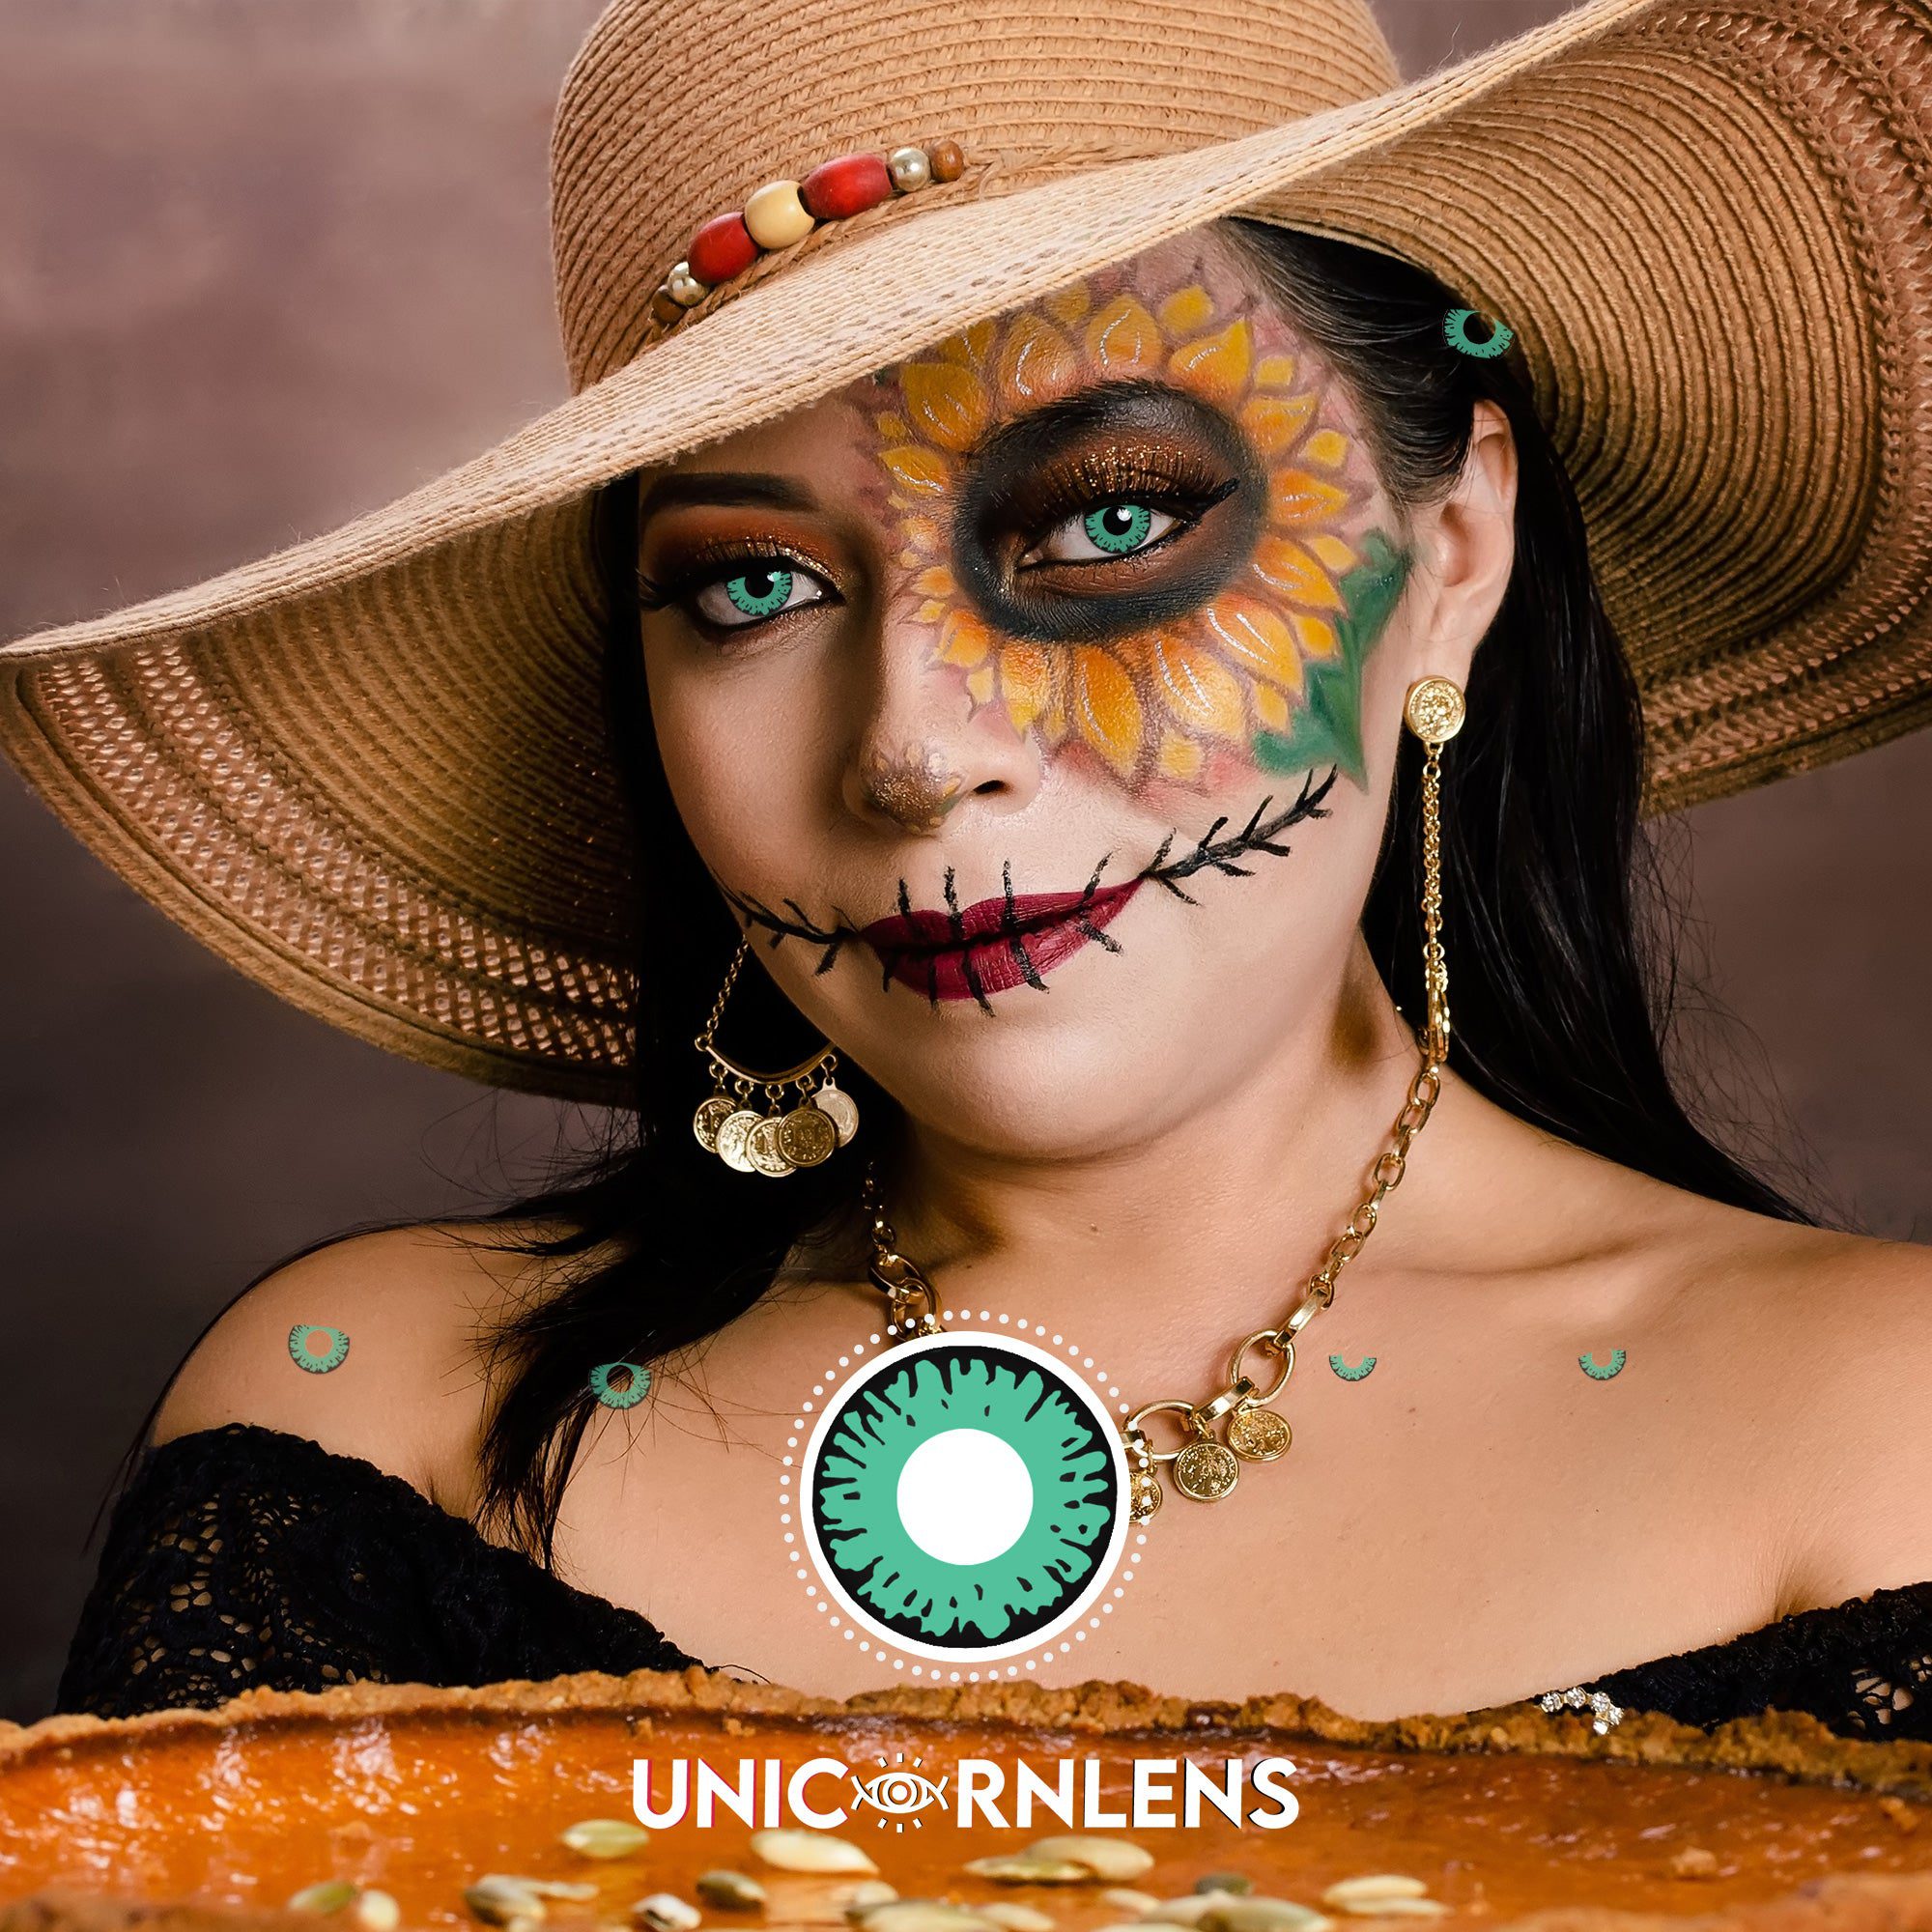 Scary young female in colorful contact lenses and with painted face  standing in dark forest and